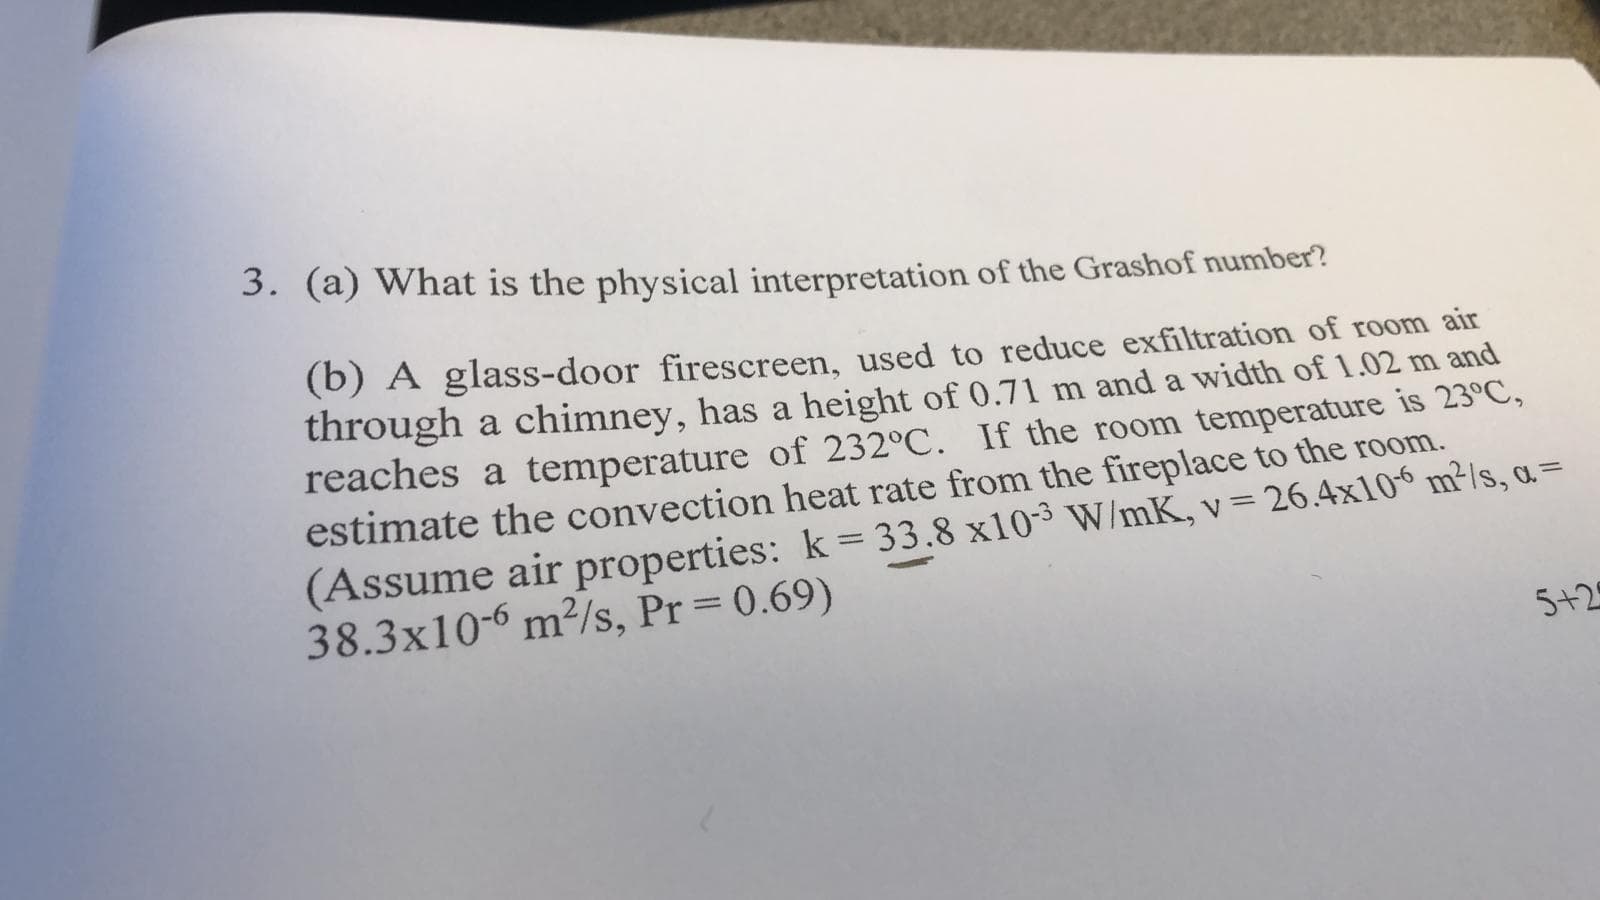 3. (a) What is the physical interpretation of the Grashof number?
(b) A glass-door firescreen, used to reduce exfiltration of room air
through a chimney, has a height of 0.71 m and a width of 1.02 m and
reaches a temperature of 232°C. If the room temperature is 23°C,
estimate the convection heat rate from the fireplace to the room.
(Assume air properties: k = 33.8 x103 W/mK, v = 26.4x106 m²/s, a. =
38.3x10-6 m²/s, Pr 0.69)
%3D
